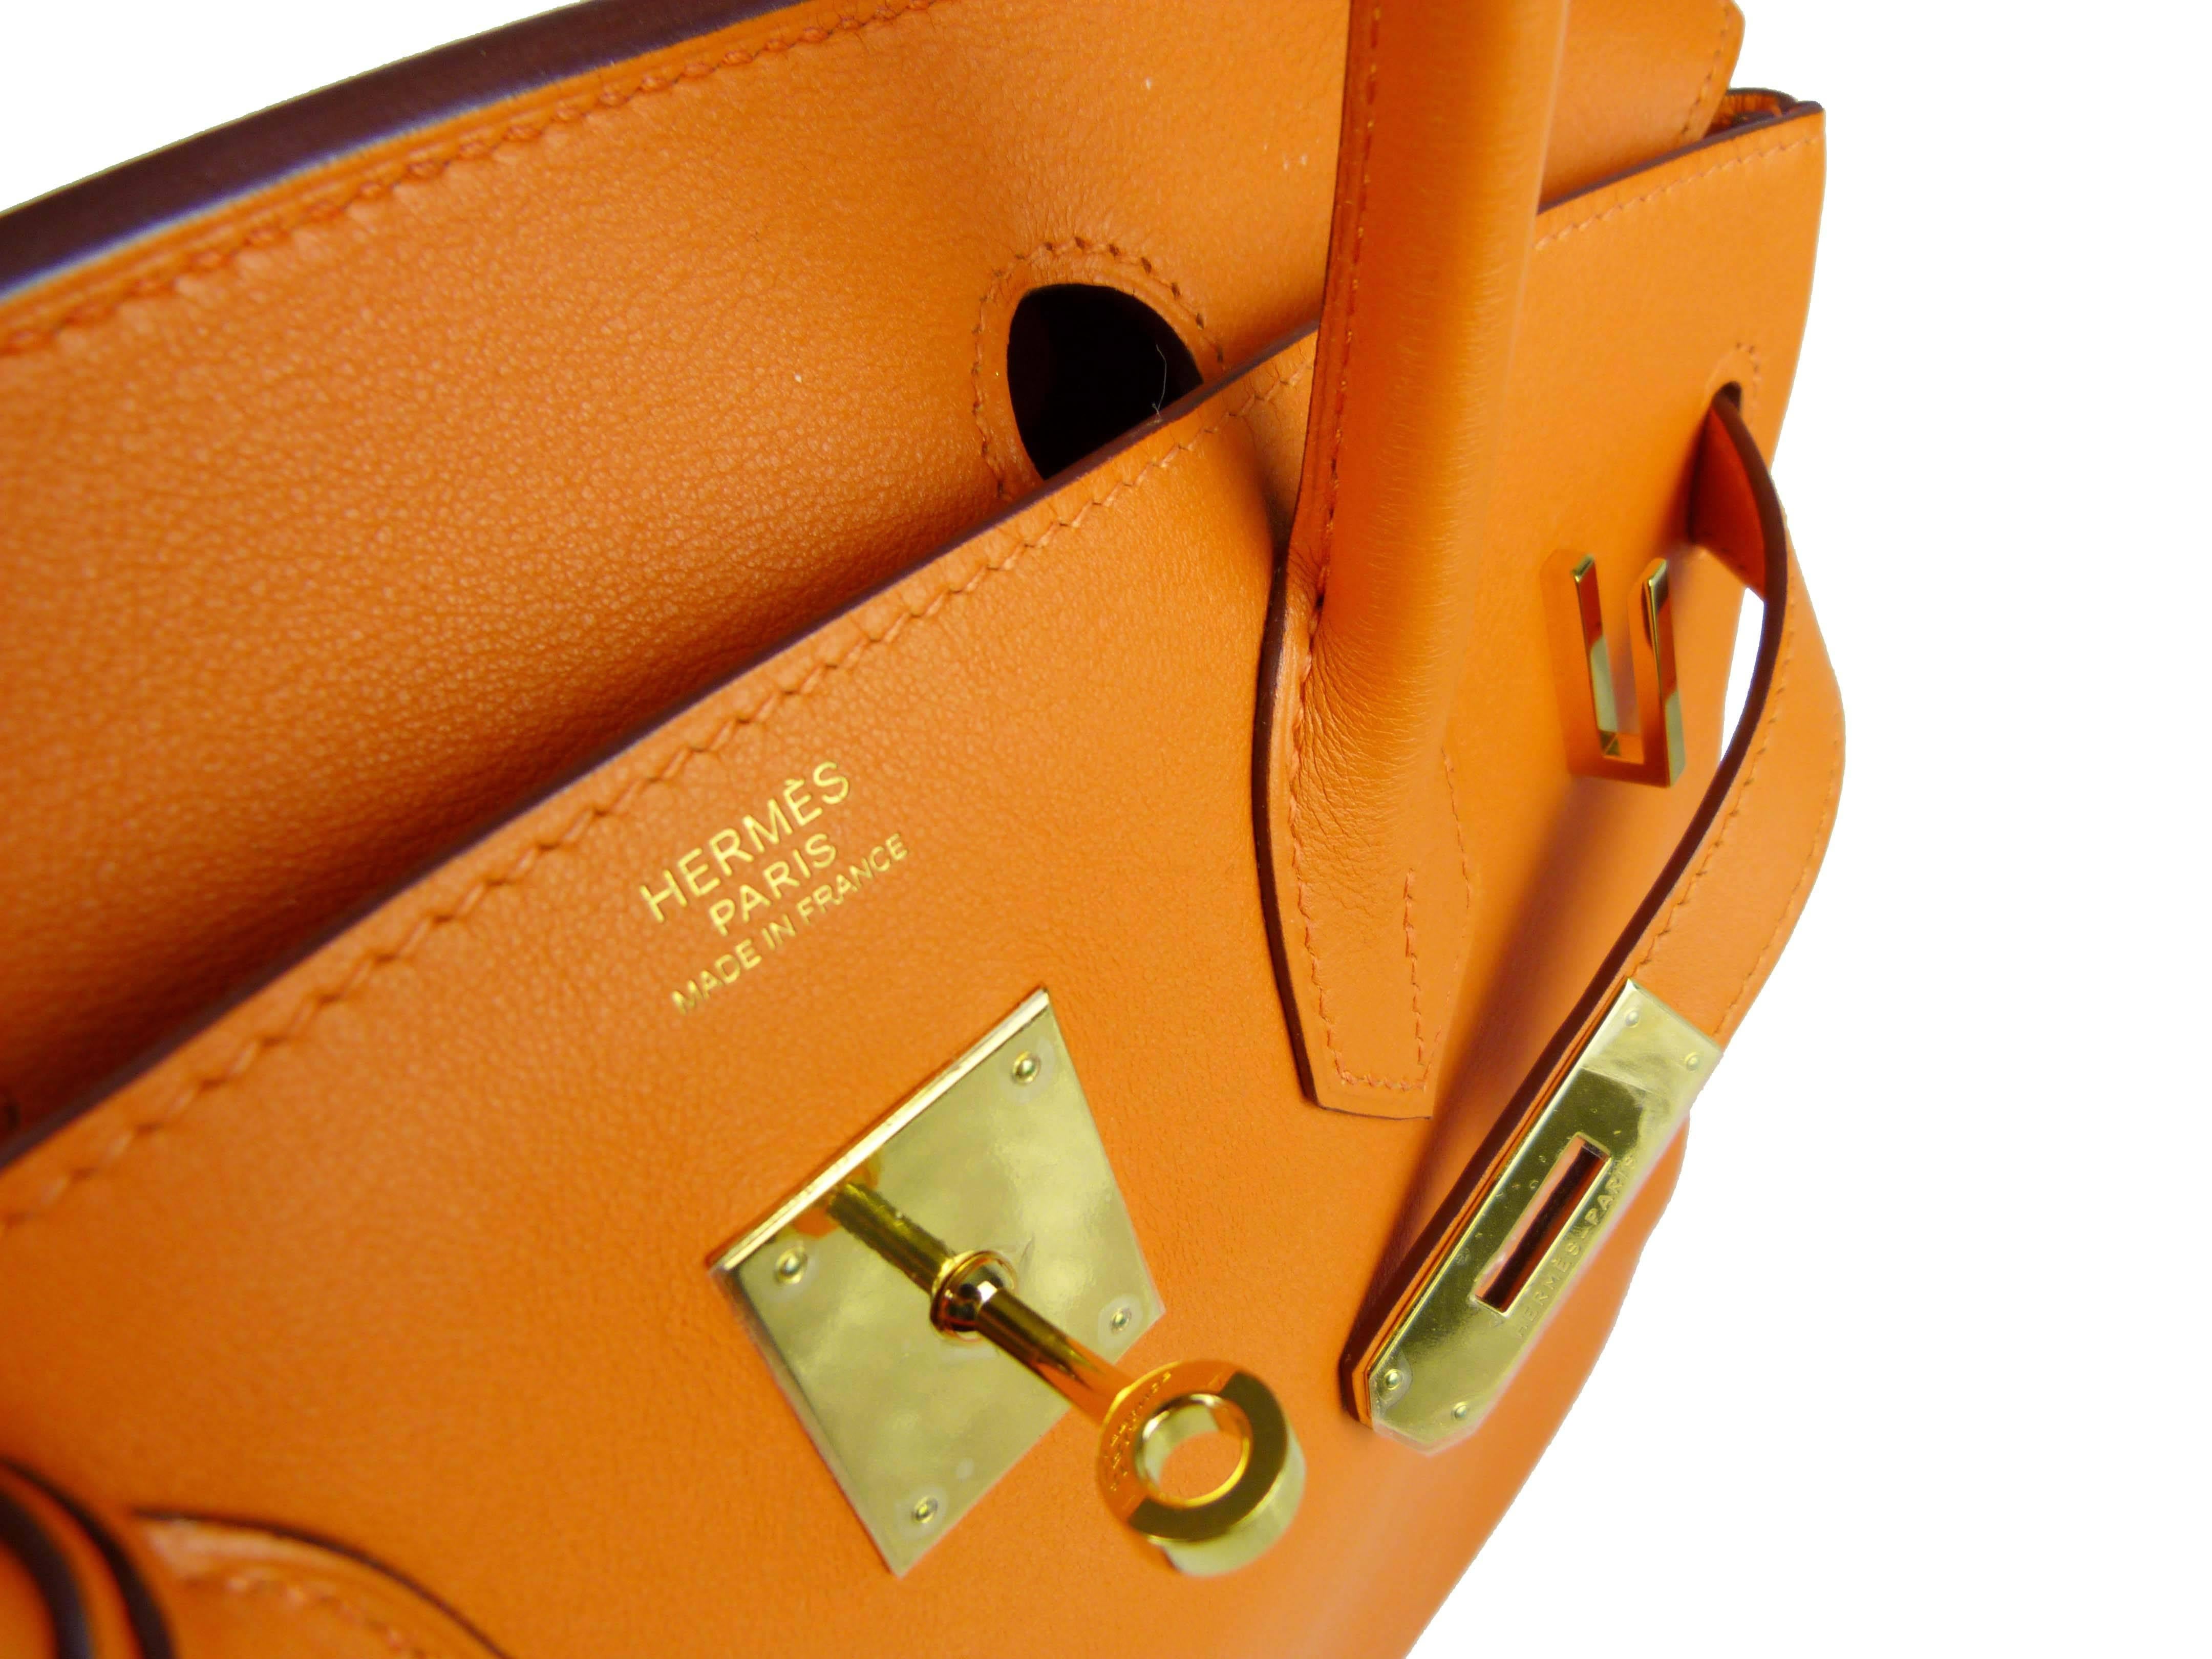 Hermes Birkin bag 30cm calf Gulliver orange, ties and gold plated clasp, double handle, keys, padlocks and dustbag. 

Very good condition and authenticated by experts Chombert & Sternbach in Paris.

Like new, Still have the protective plastic. 
Year